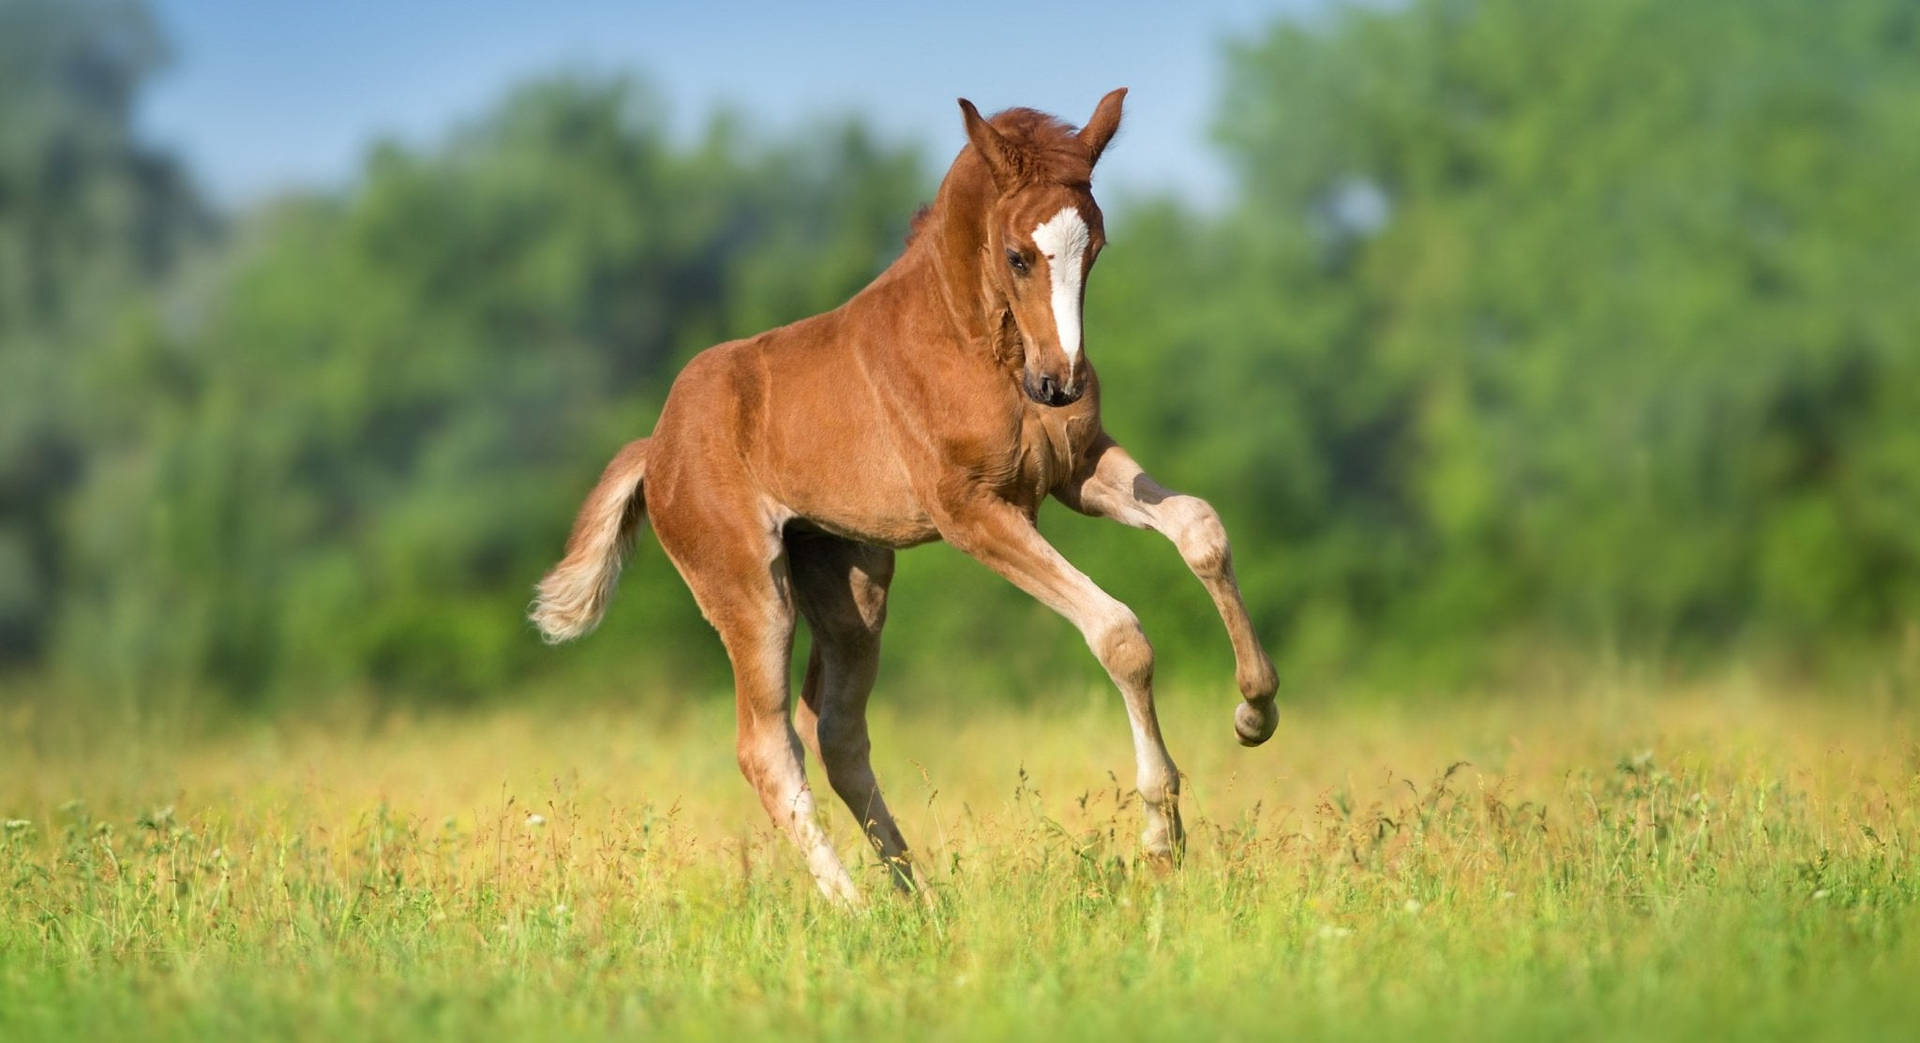 Red Foal Running Free On Spring Field Wallpaper